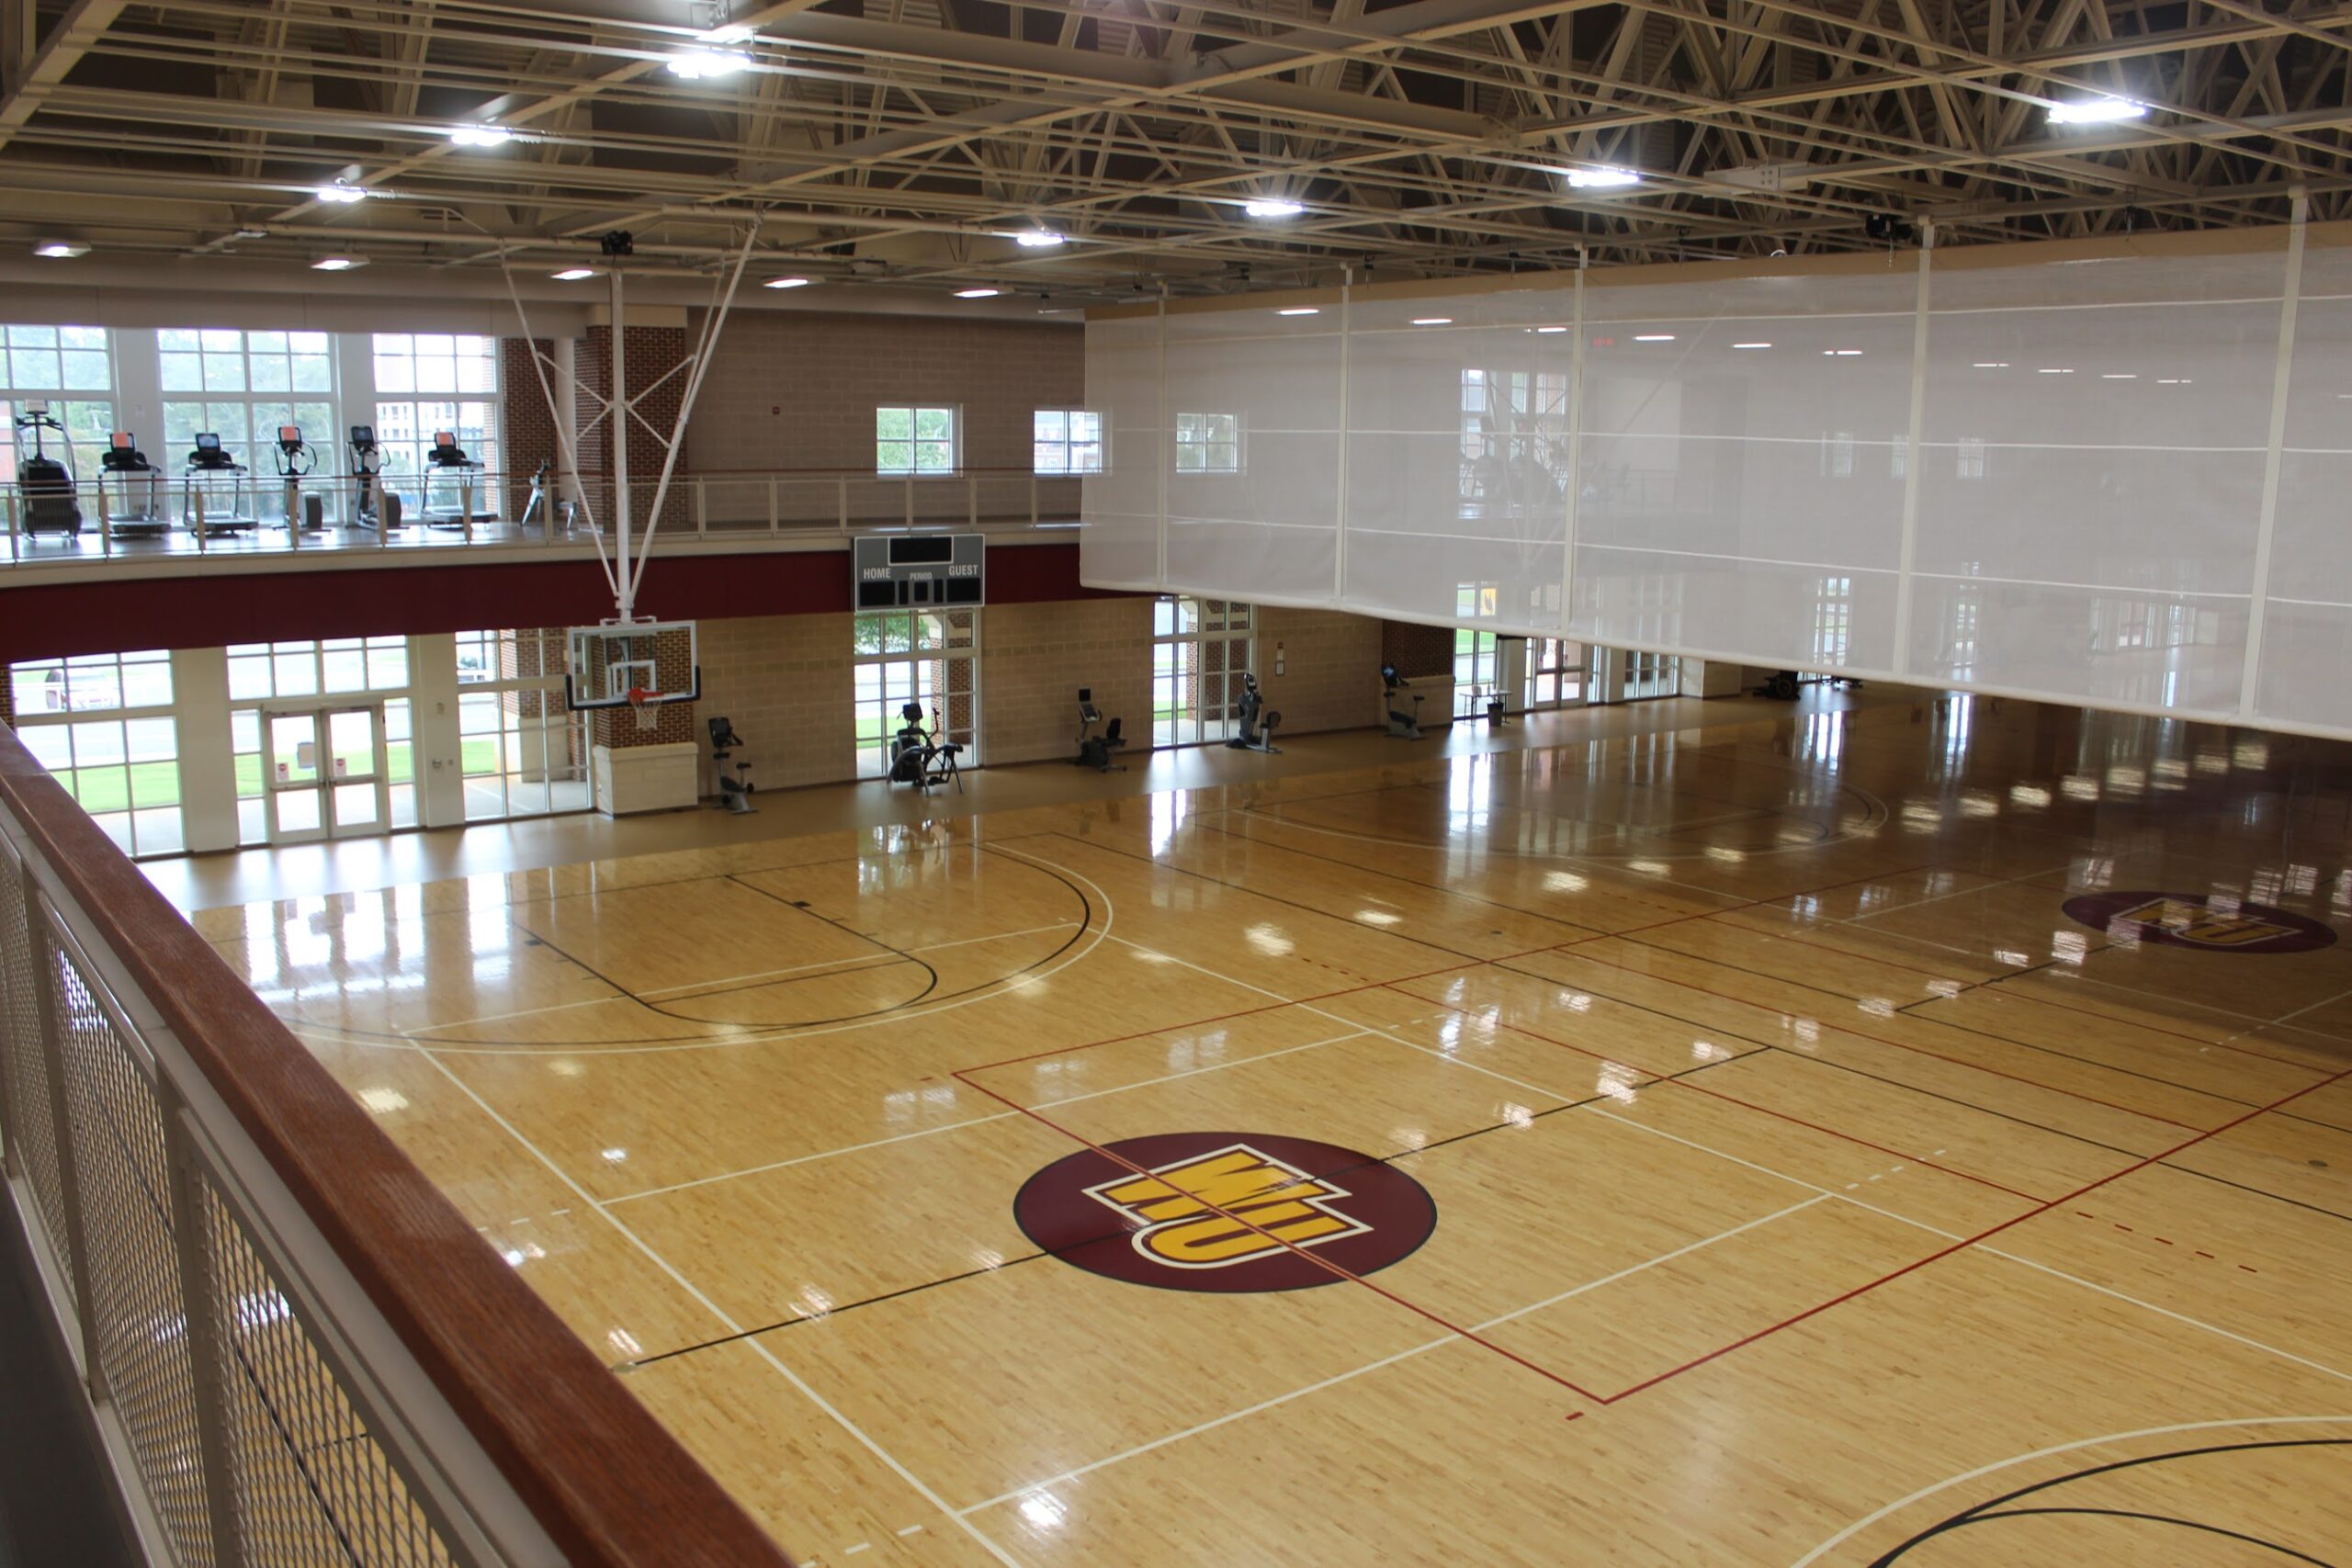 The courts at the West Center